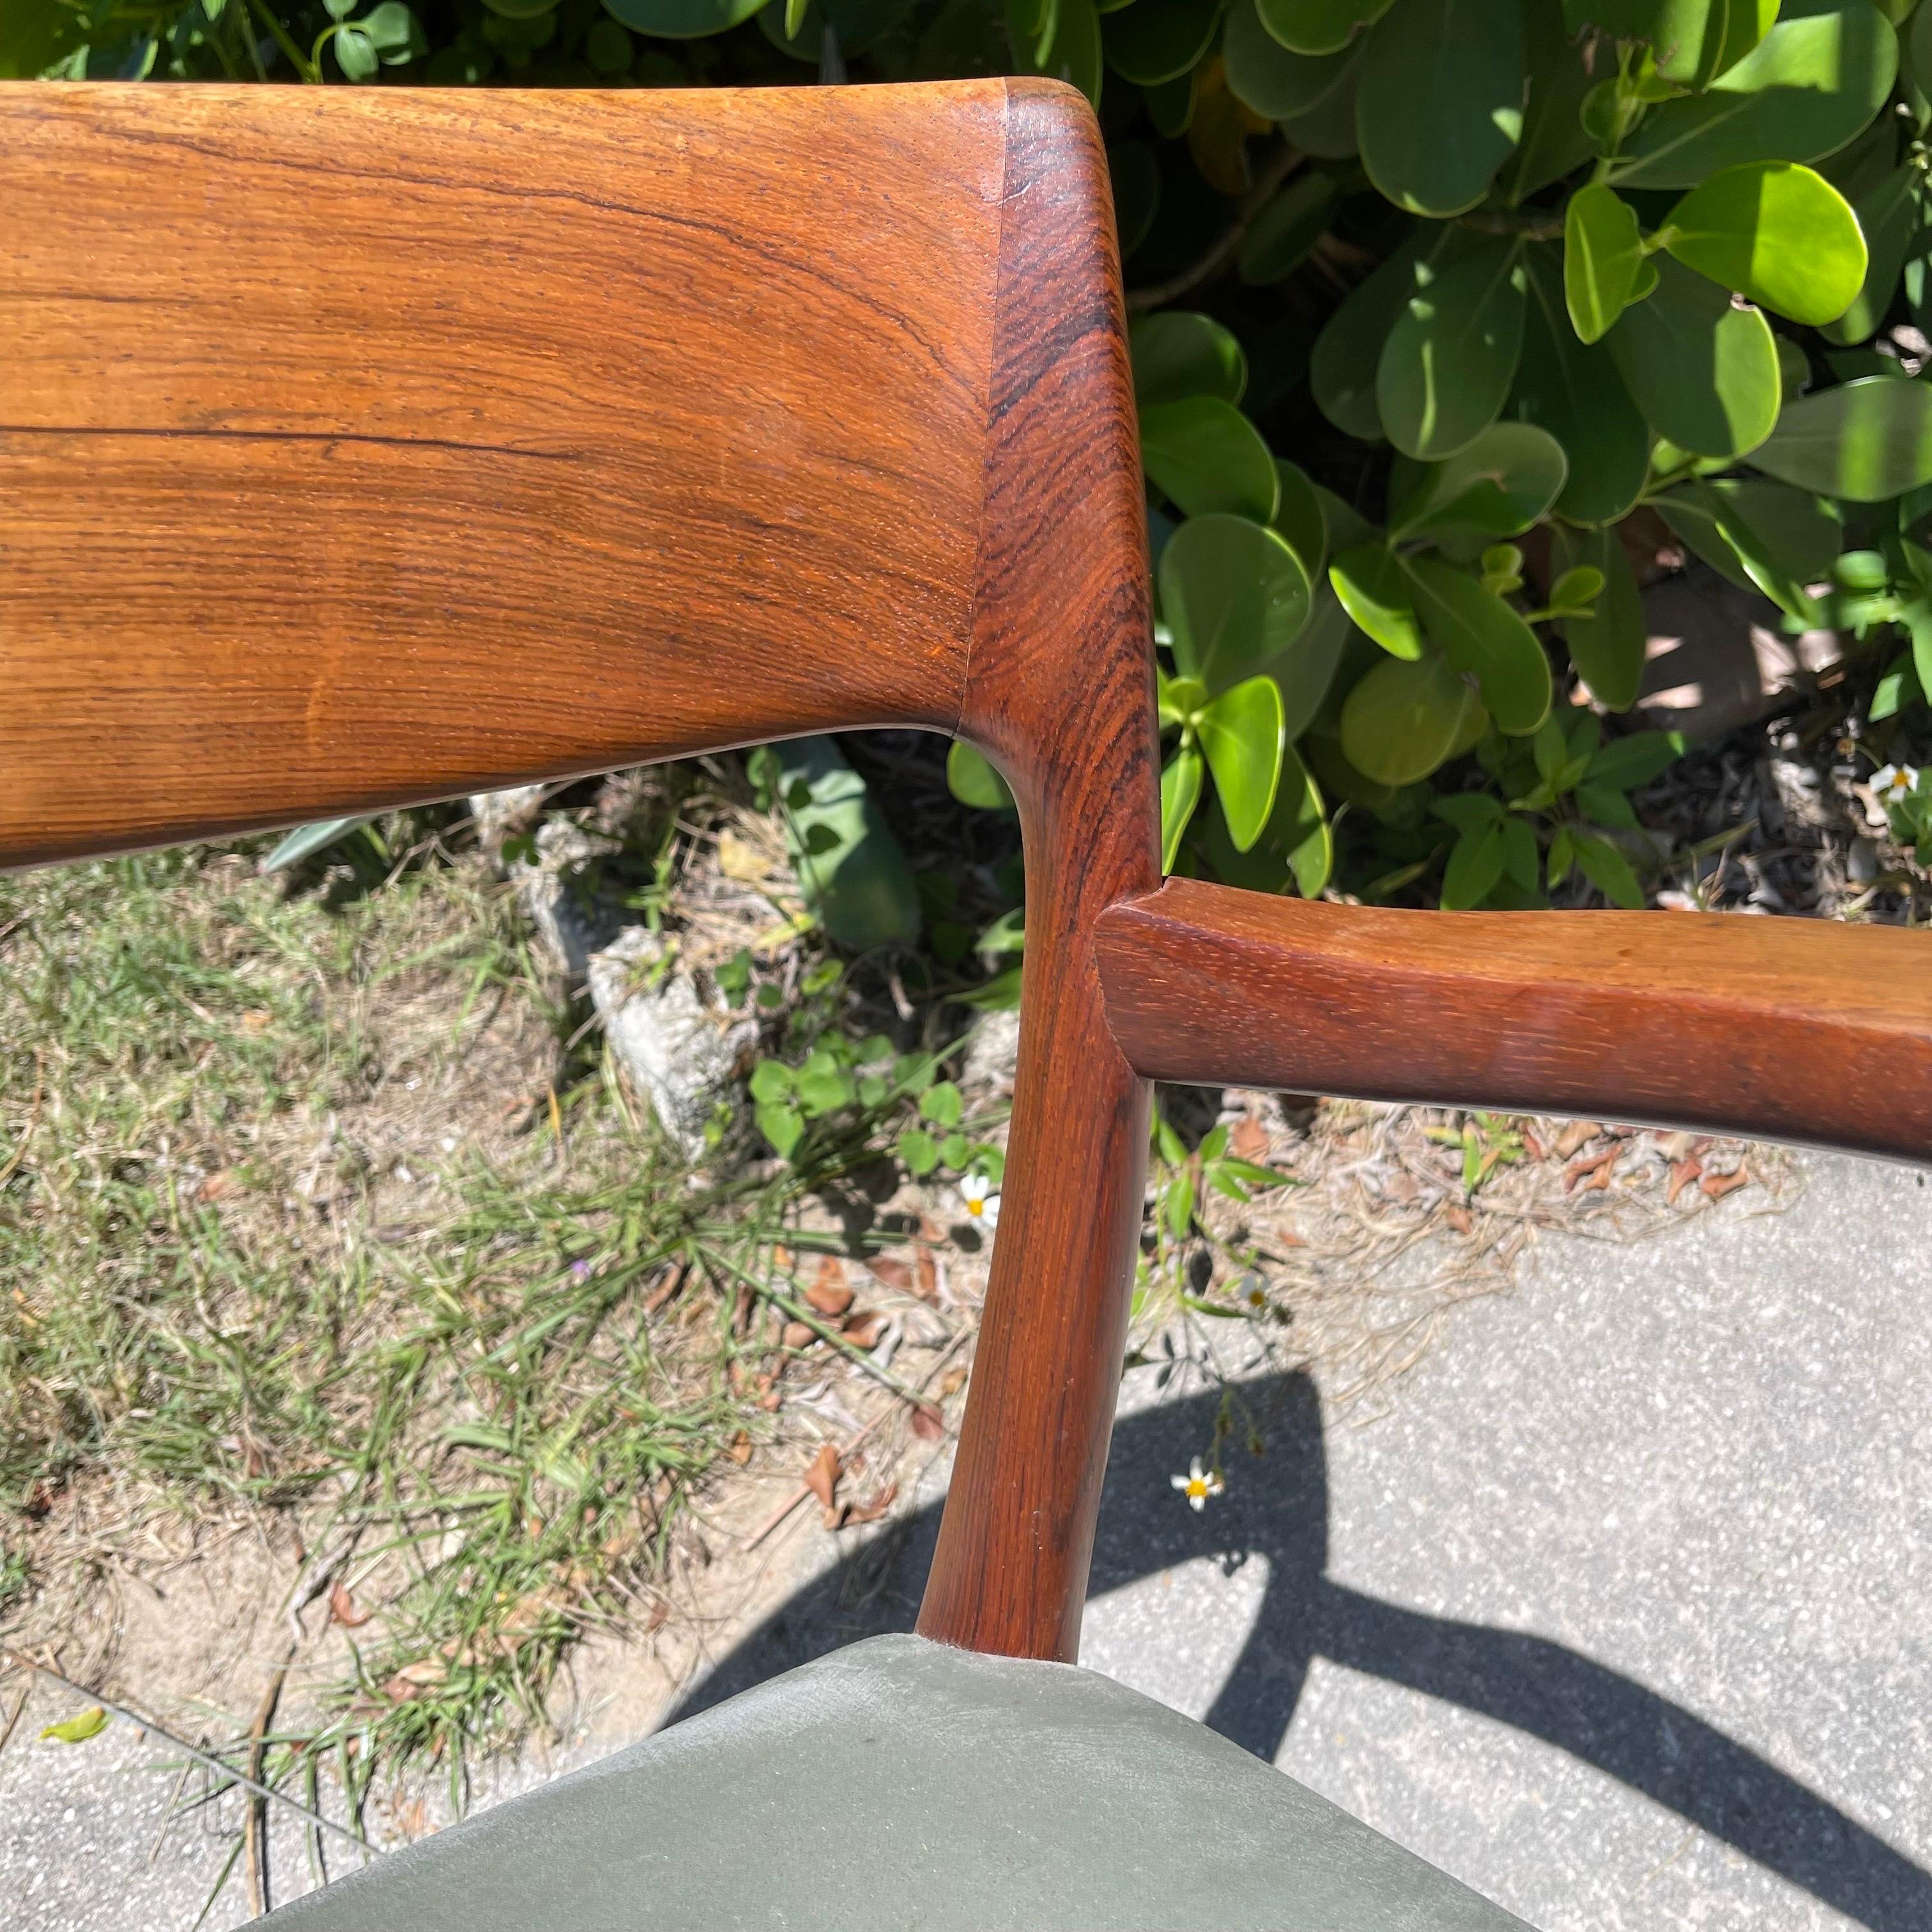 Ultra-rare chair handcrafted in Denmark of the finest solid rosewood. A functional work of art.

Seat interior width: 18”
Arm height: 9.5”
Seat interior depth: 18”